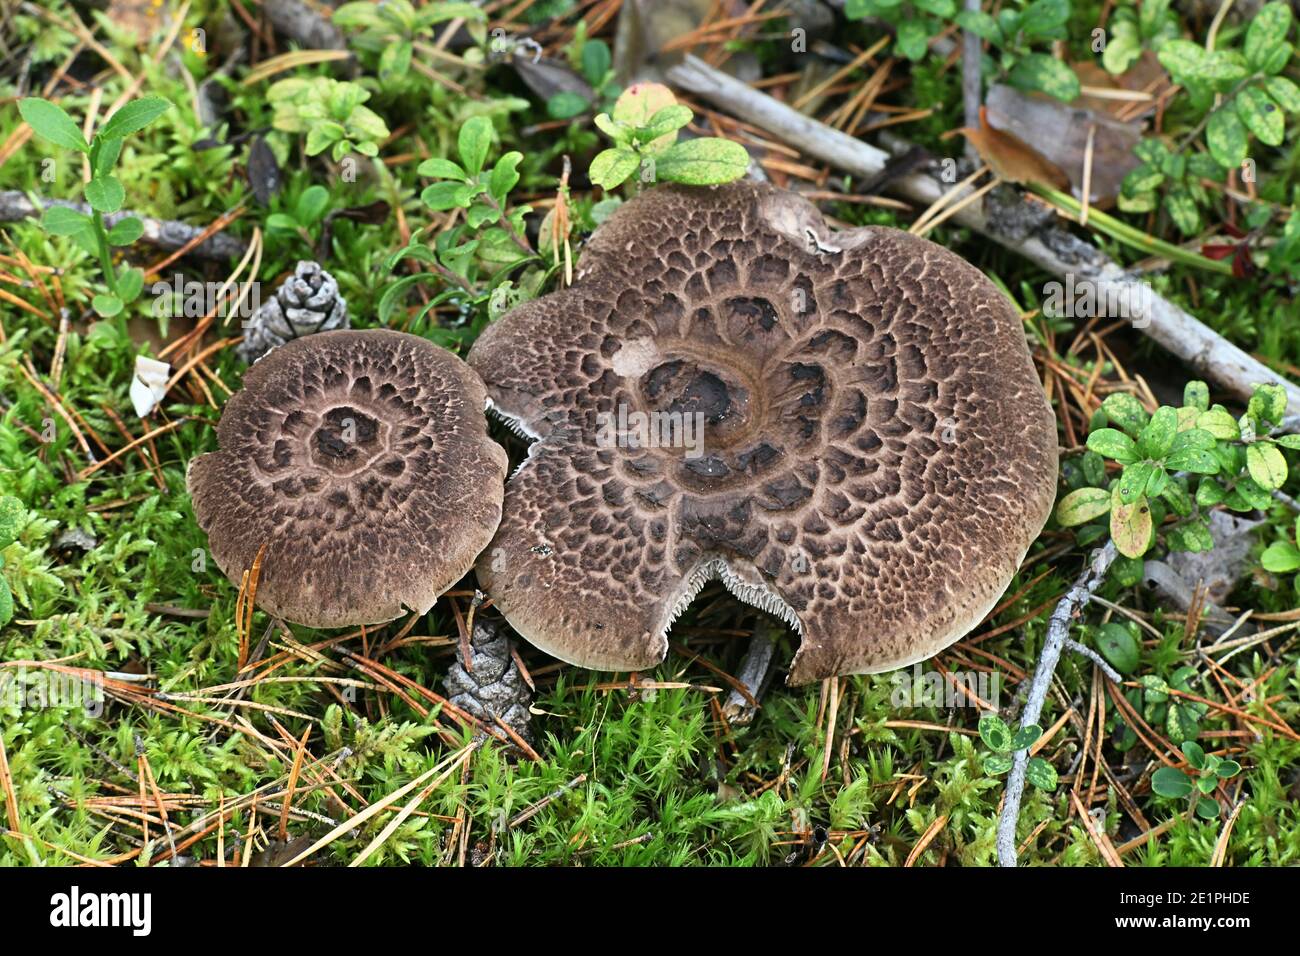 Sarcodon squamosus, also called Hydnum squamosum, commonly known as scaly tooth fungus, wild mushroom from Finland Stock Photo